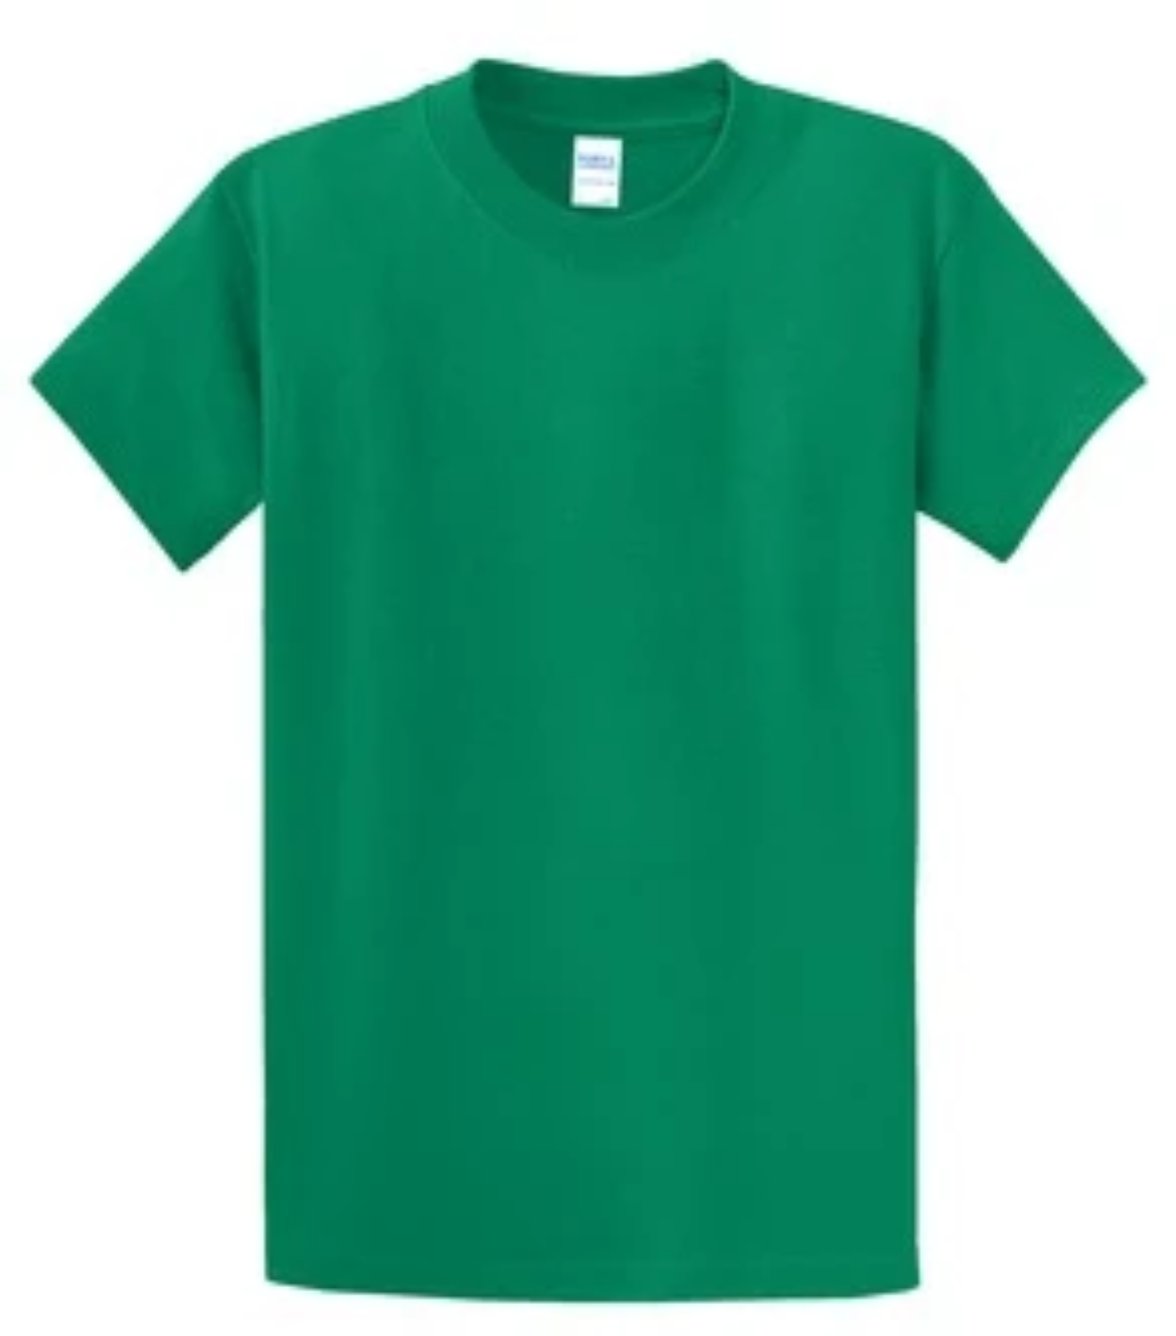 Port & Company 100% Cotton Essential T-Shirt Kelly Green PC61